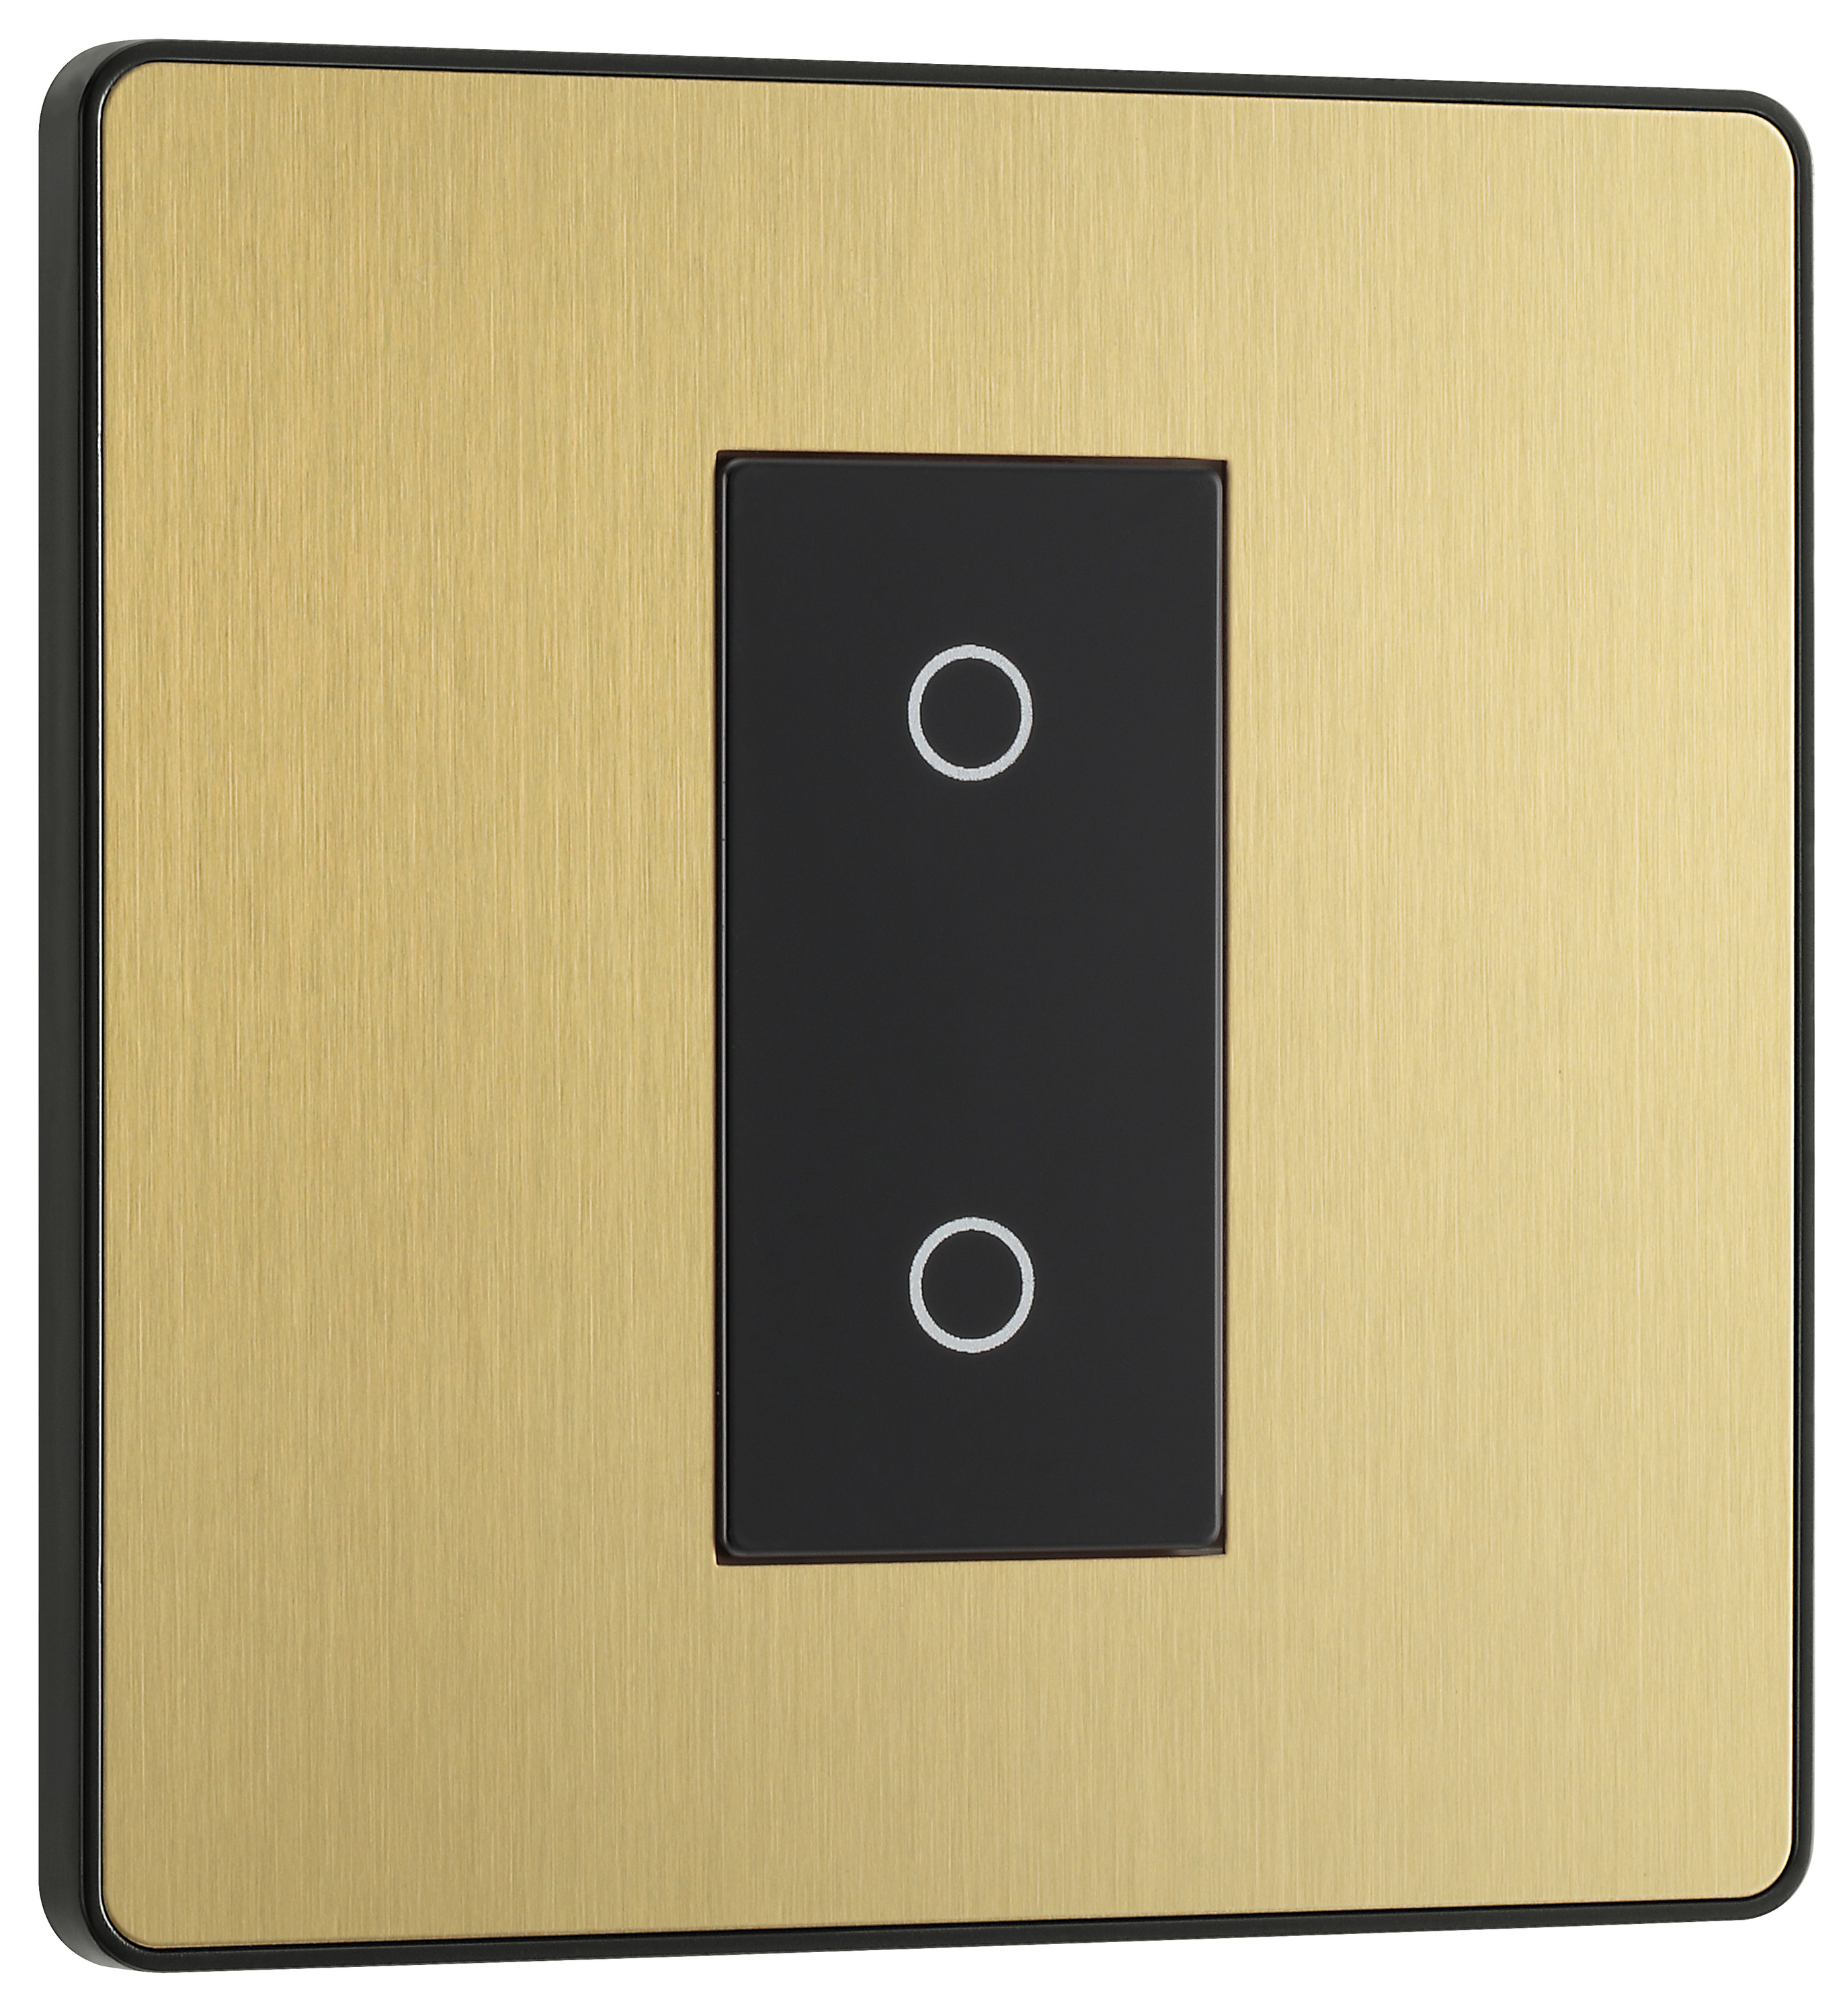 BG Evolve Secondary Brushed Brass 2 Way Single Touch Dimmer Switch - 200W